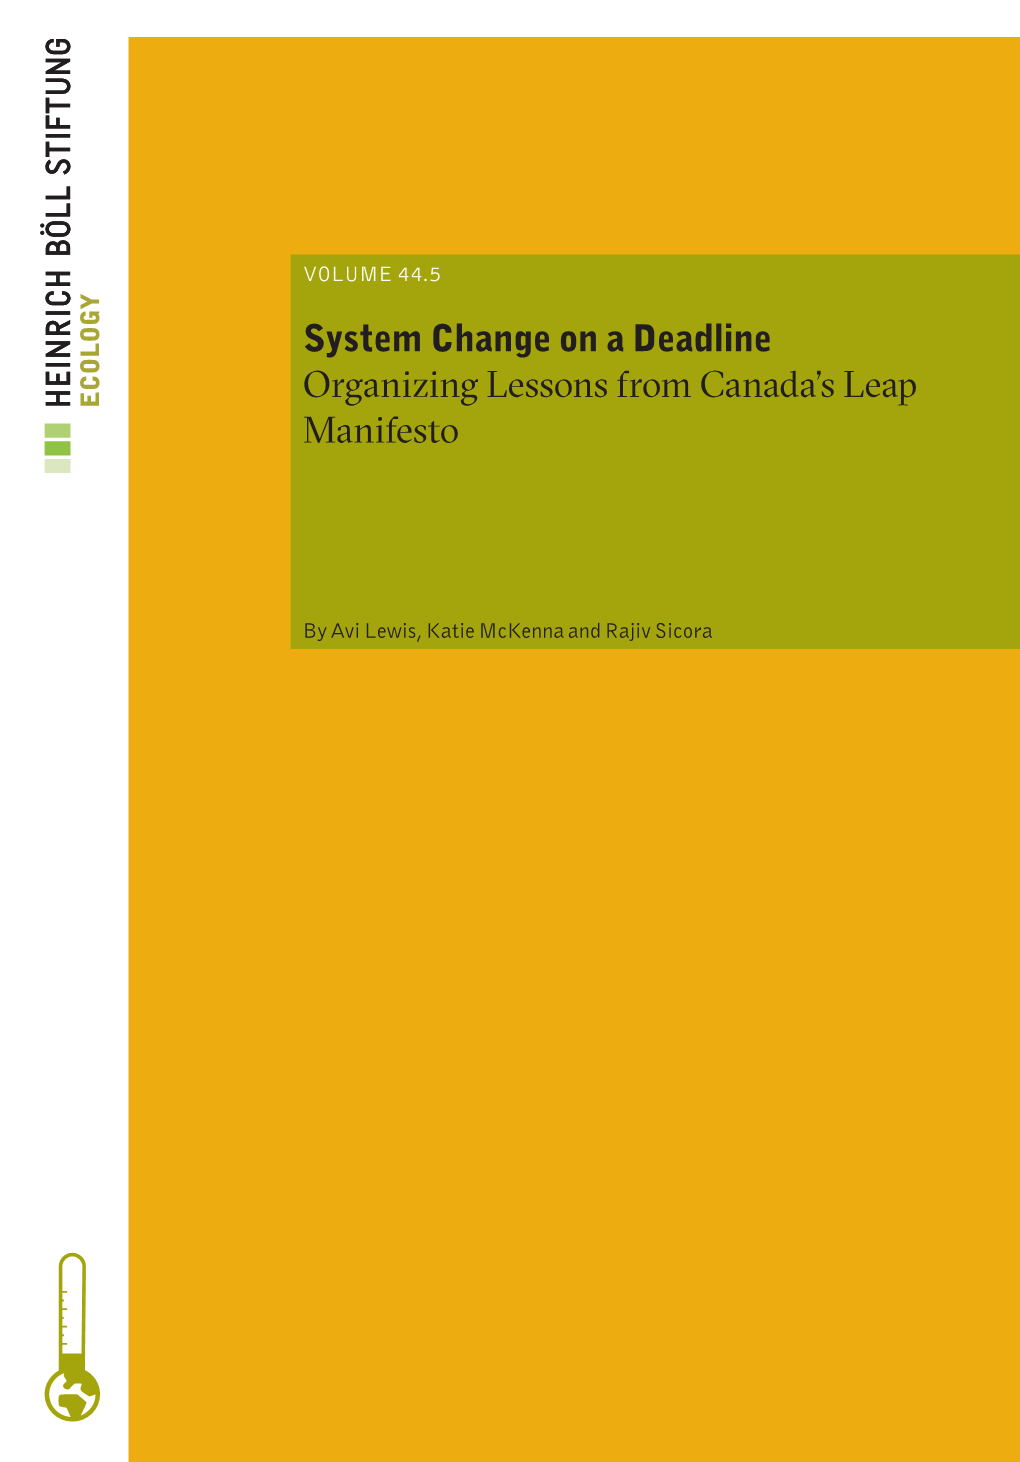 System Change on a Deadline Organizing Lessons from Canada's Leap Manifesto